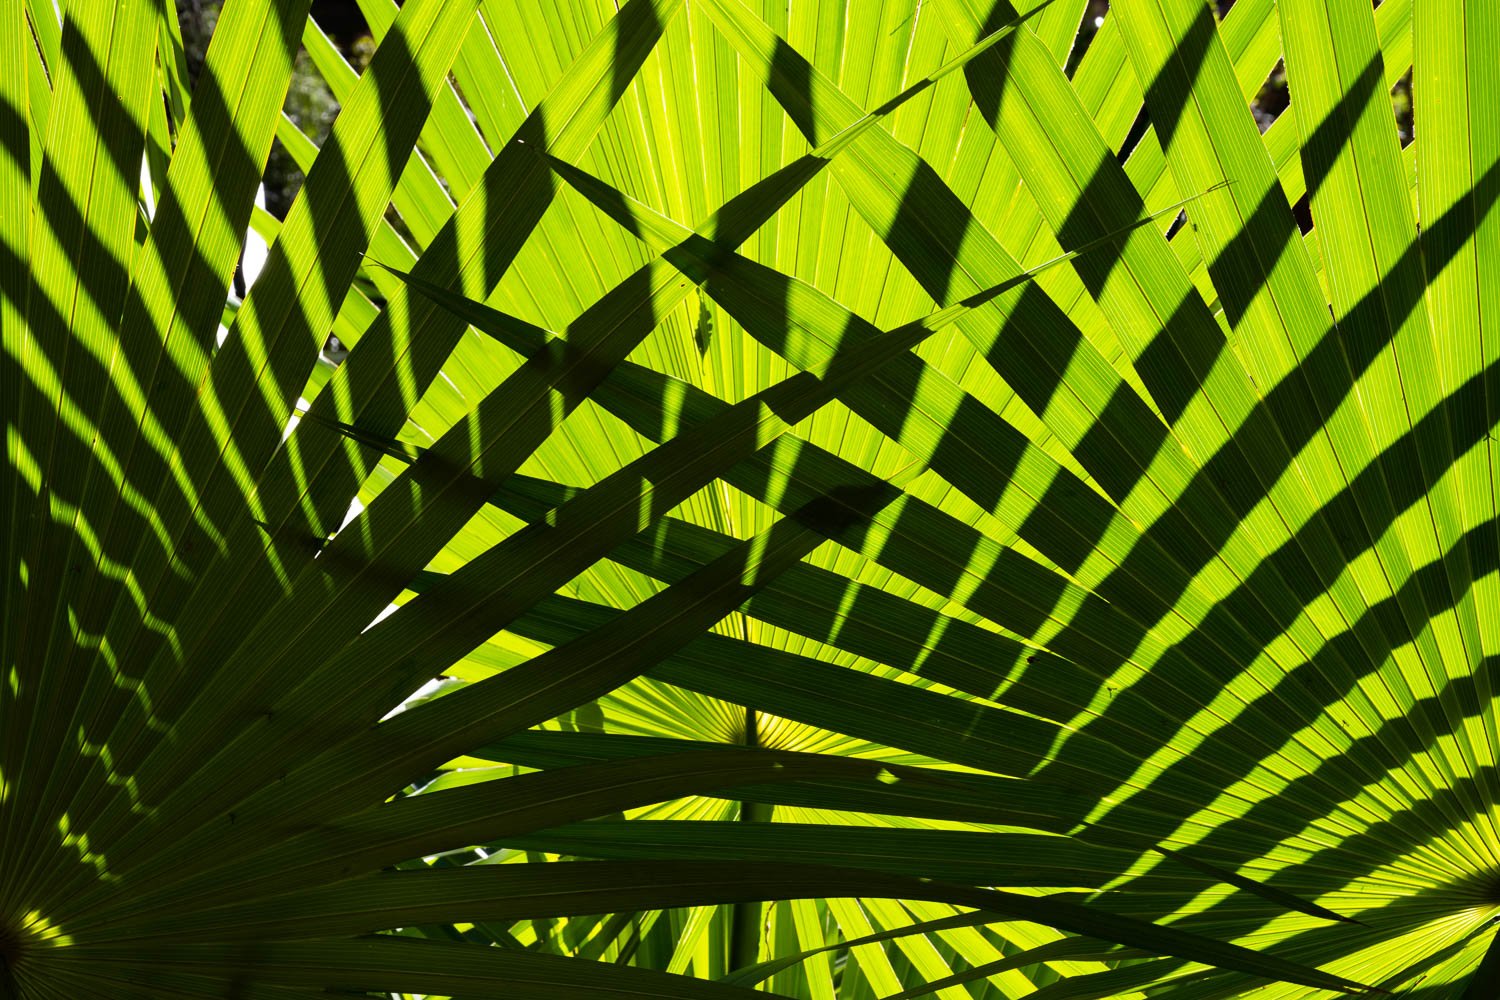 A sharp view of long green leaves intersecting each other in a group of two, shiny sunlight falling on the half picture and a solid shadow on the remaining part, Crossover, Livistona Palms, The Kimberley